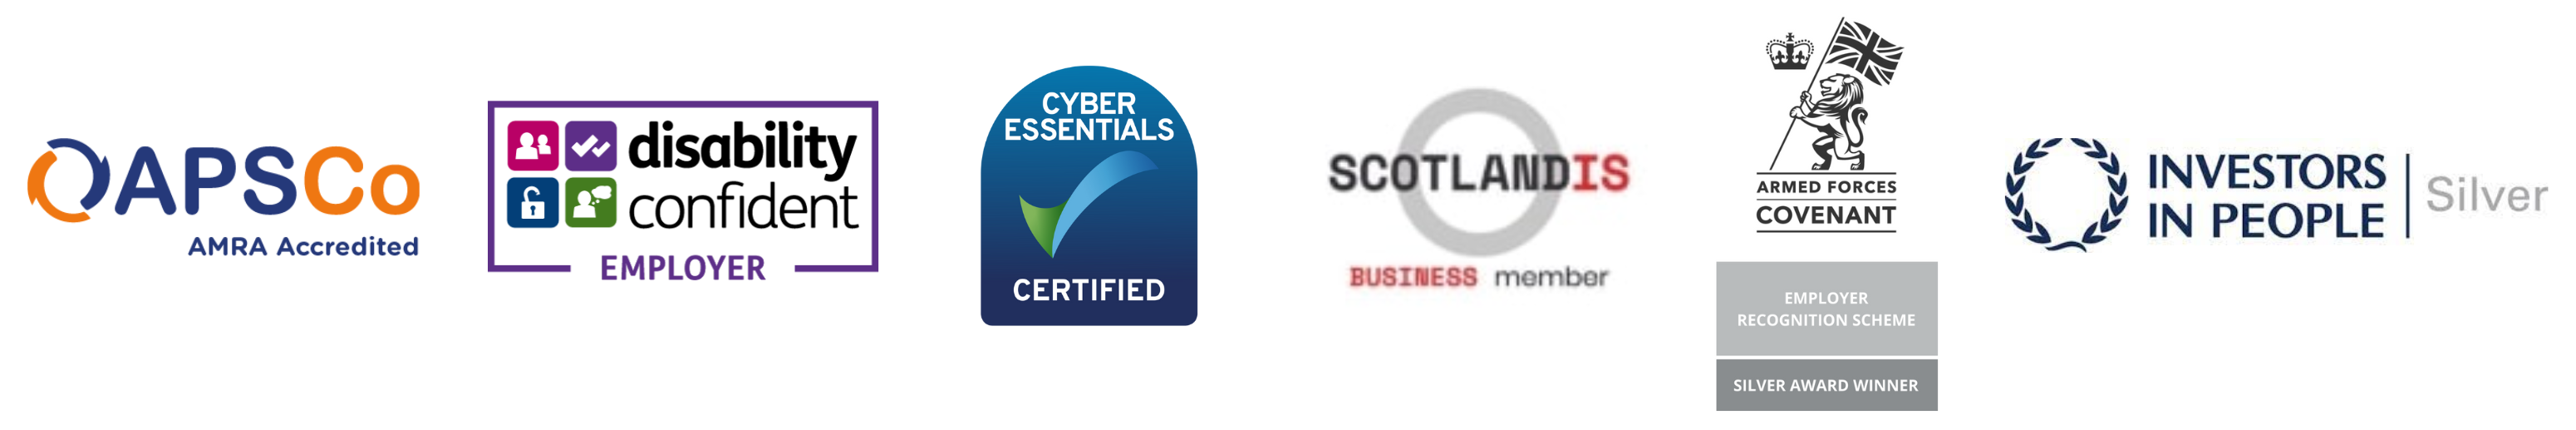 Collage of logo images of some of our memberships and accreditations. Logos against white background banner: APSCO AMRA Accredited; Disability Confident Employer; Cyber Essentials Certified; SCOTLANDIS Business Member; Armed Fored Covenant; Investors in People | Silver